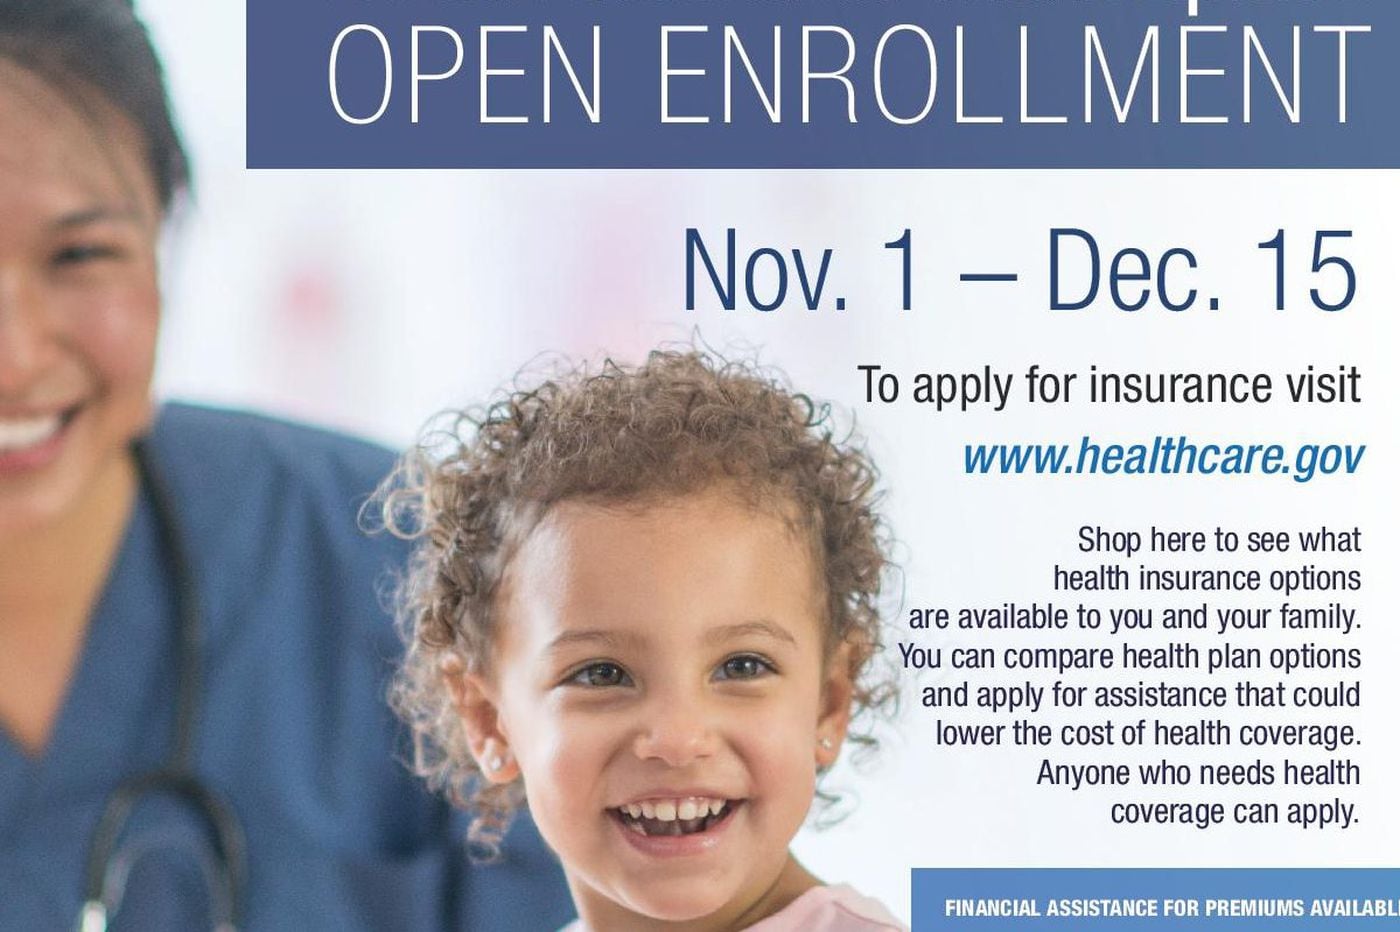 Where to get help with ACA open enrollment this year